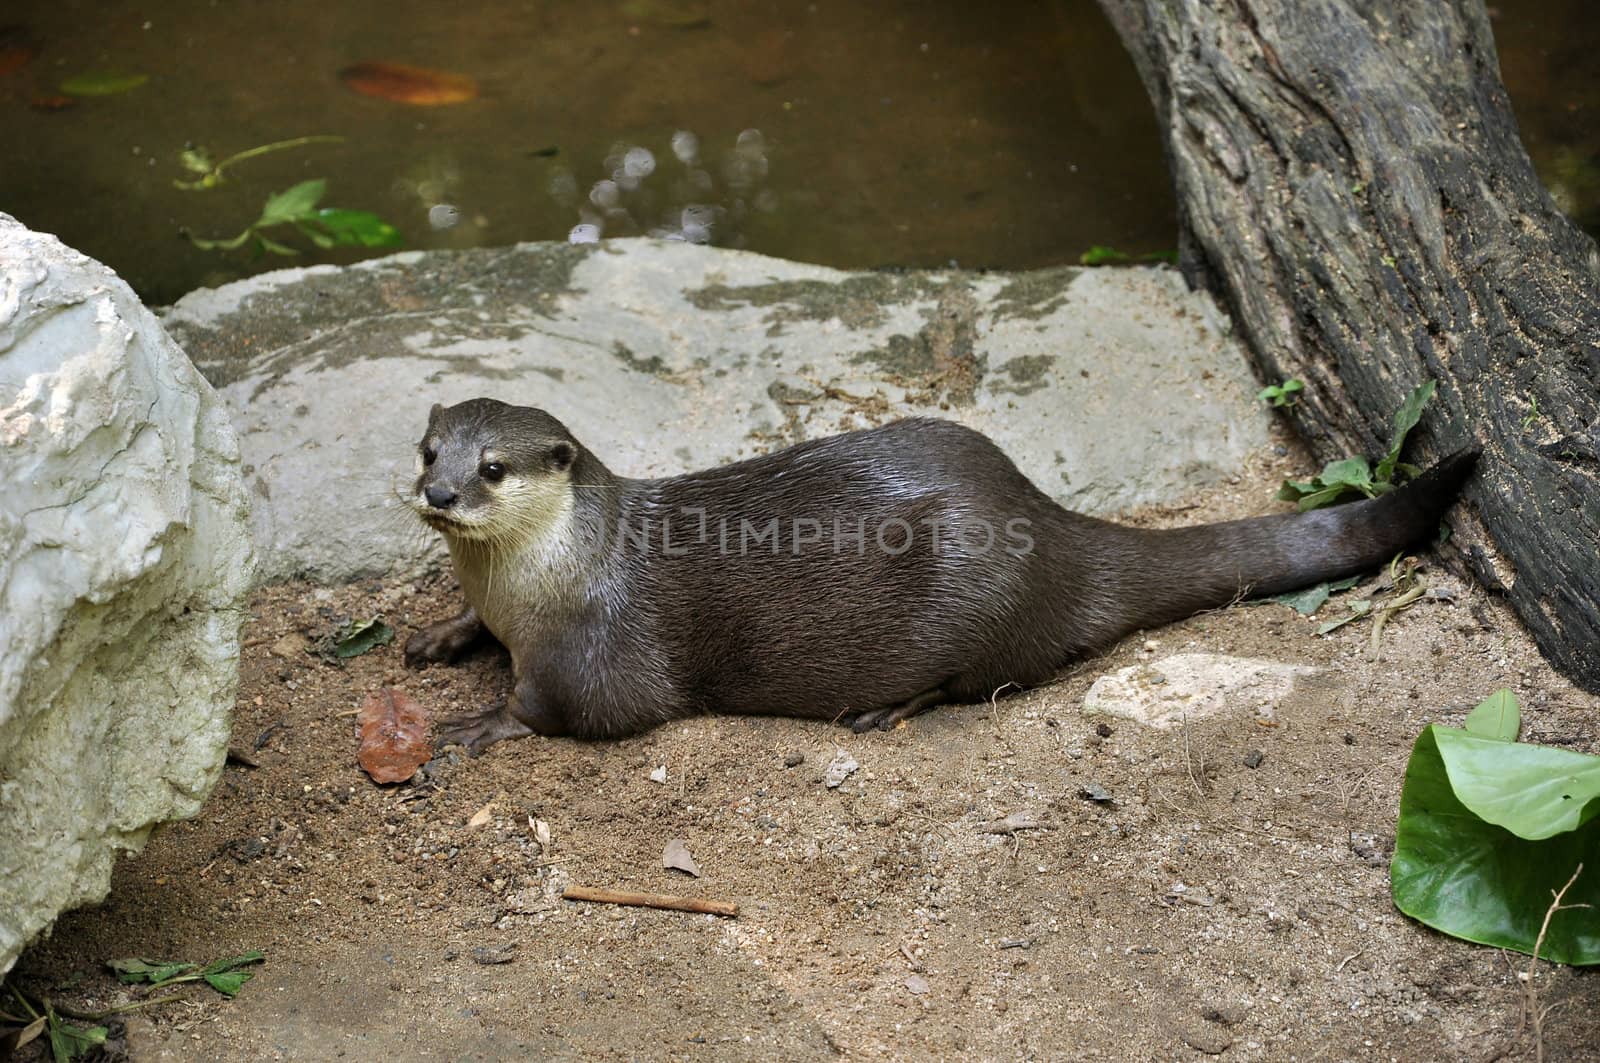 Otter is semi-aquatic mammal. Otters live up to 16 years